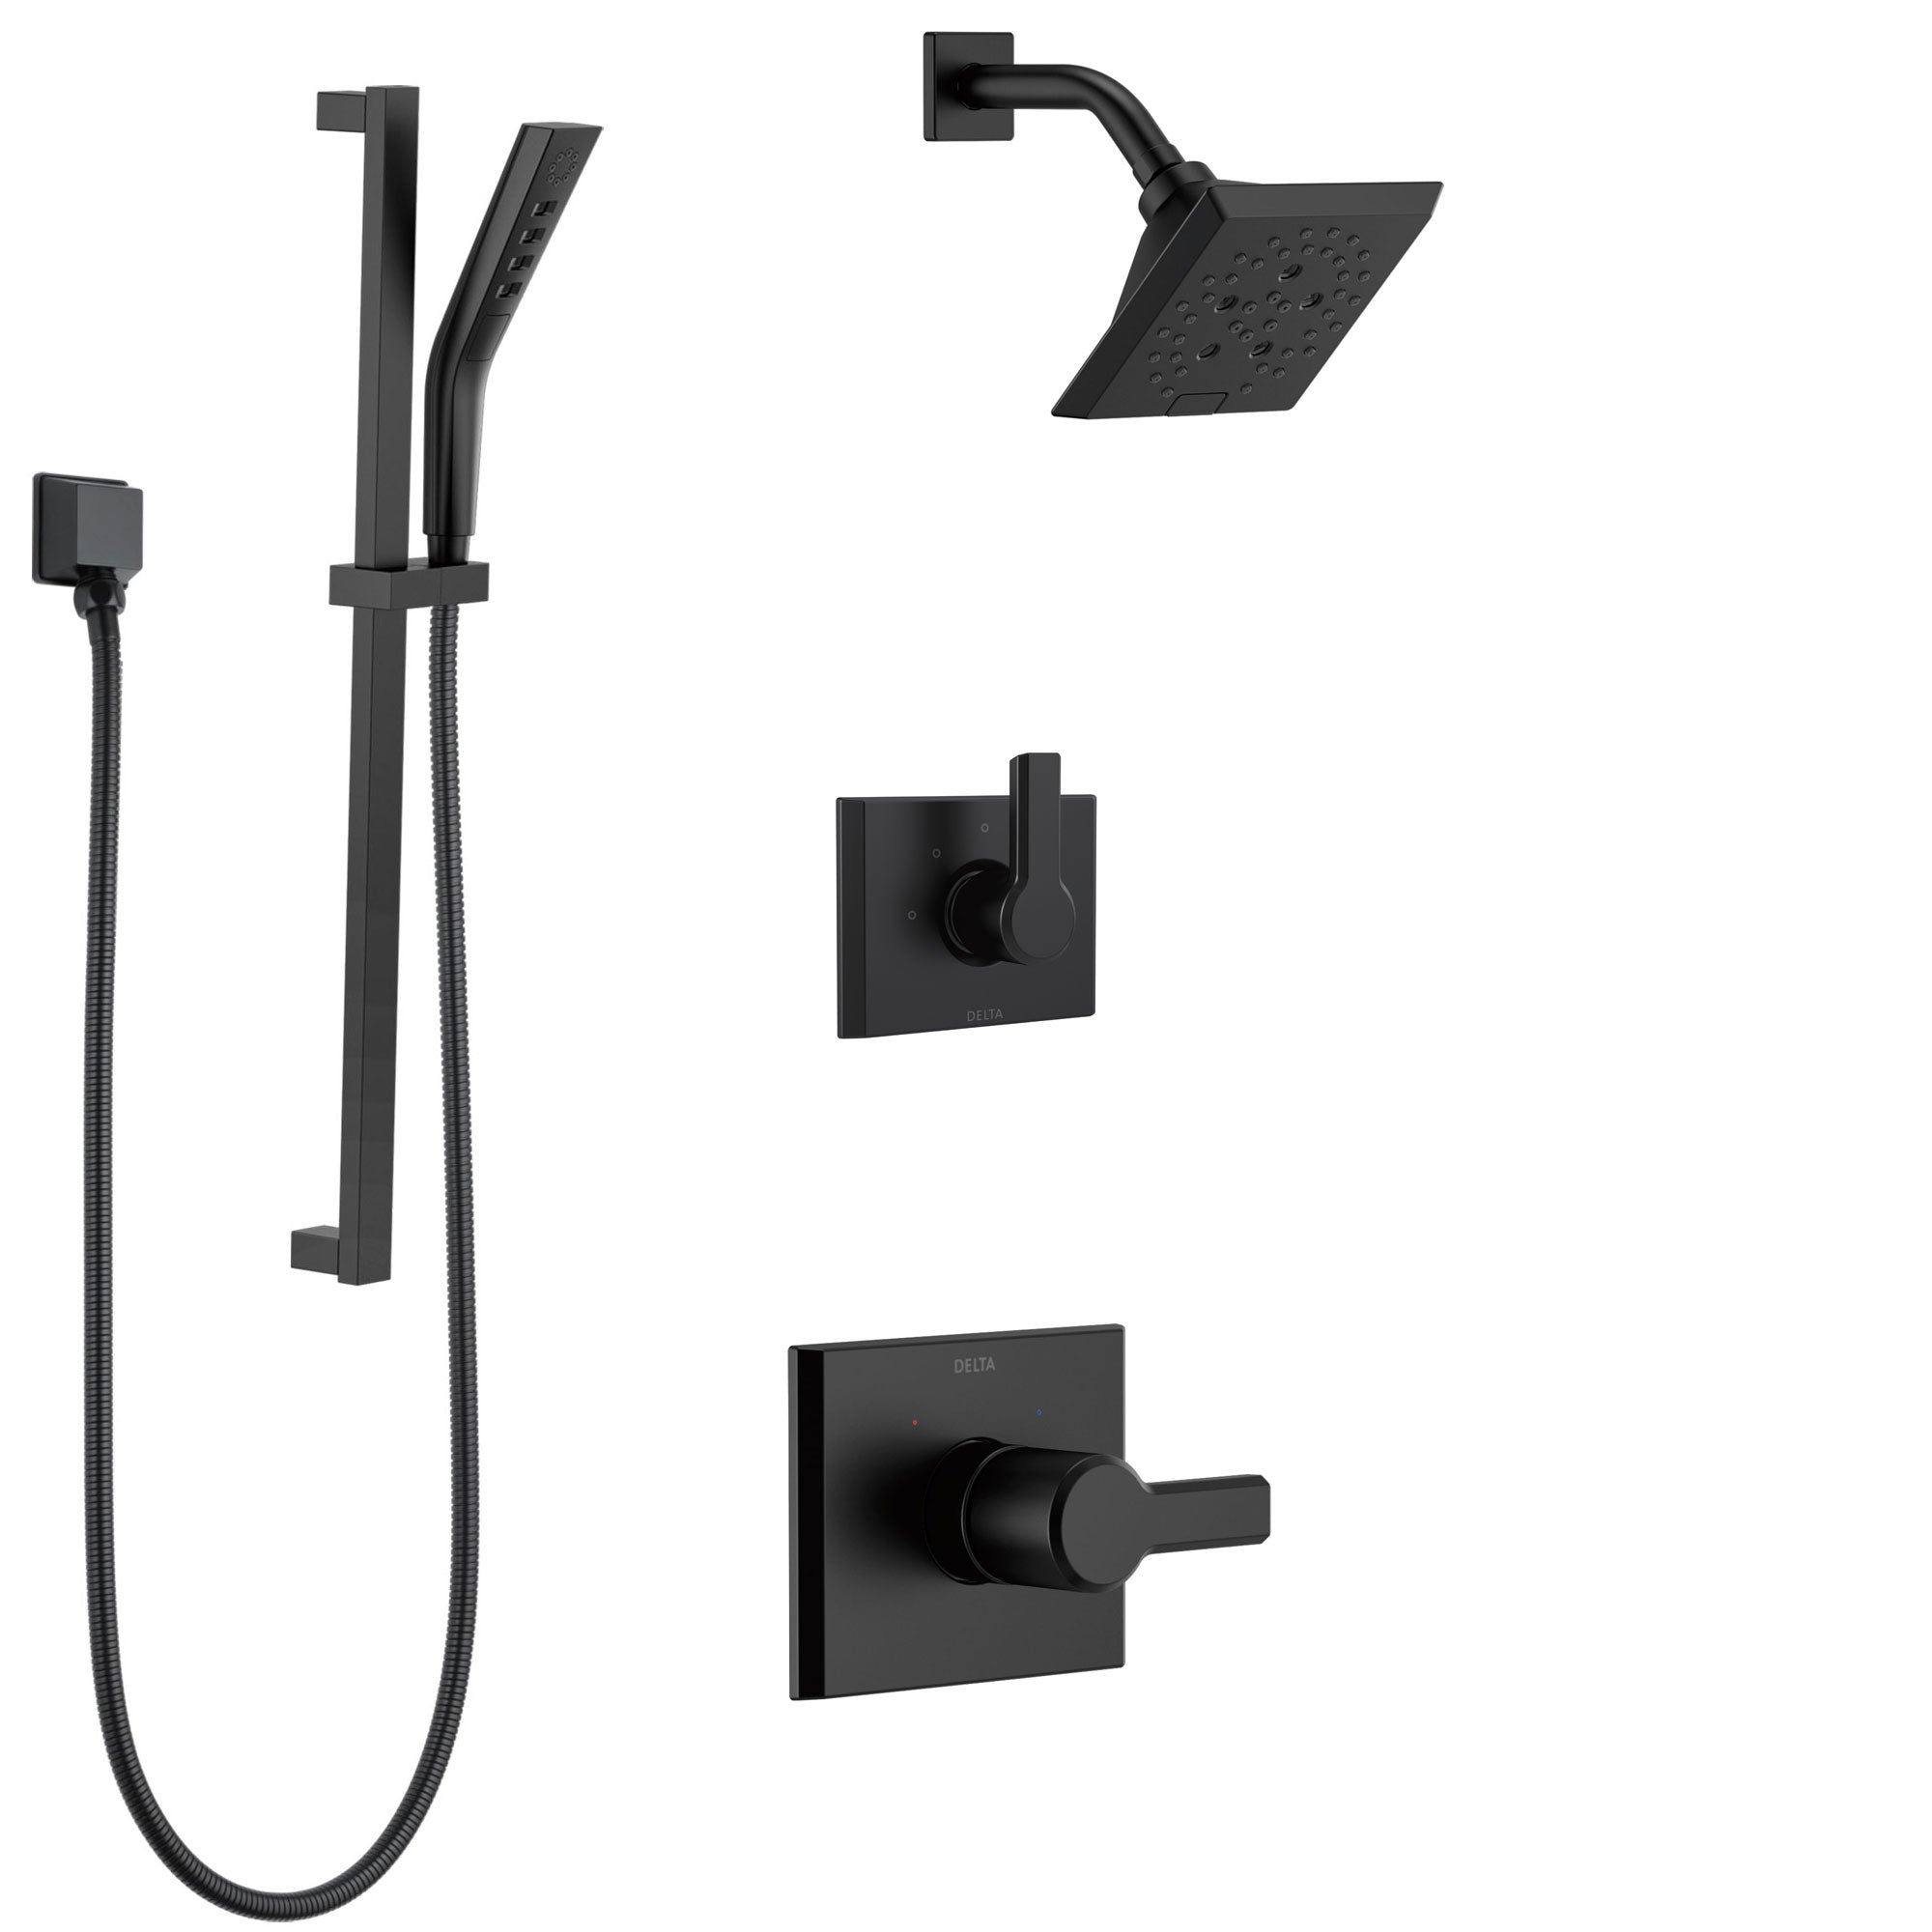 Delta Pivotal Matte Black Finish Modern Shower System with Diverter, Wall Mounted Hand Shower with Slide Bar, and Multi-Setting Showerhead SS142993BL3